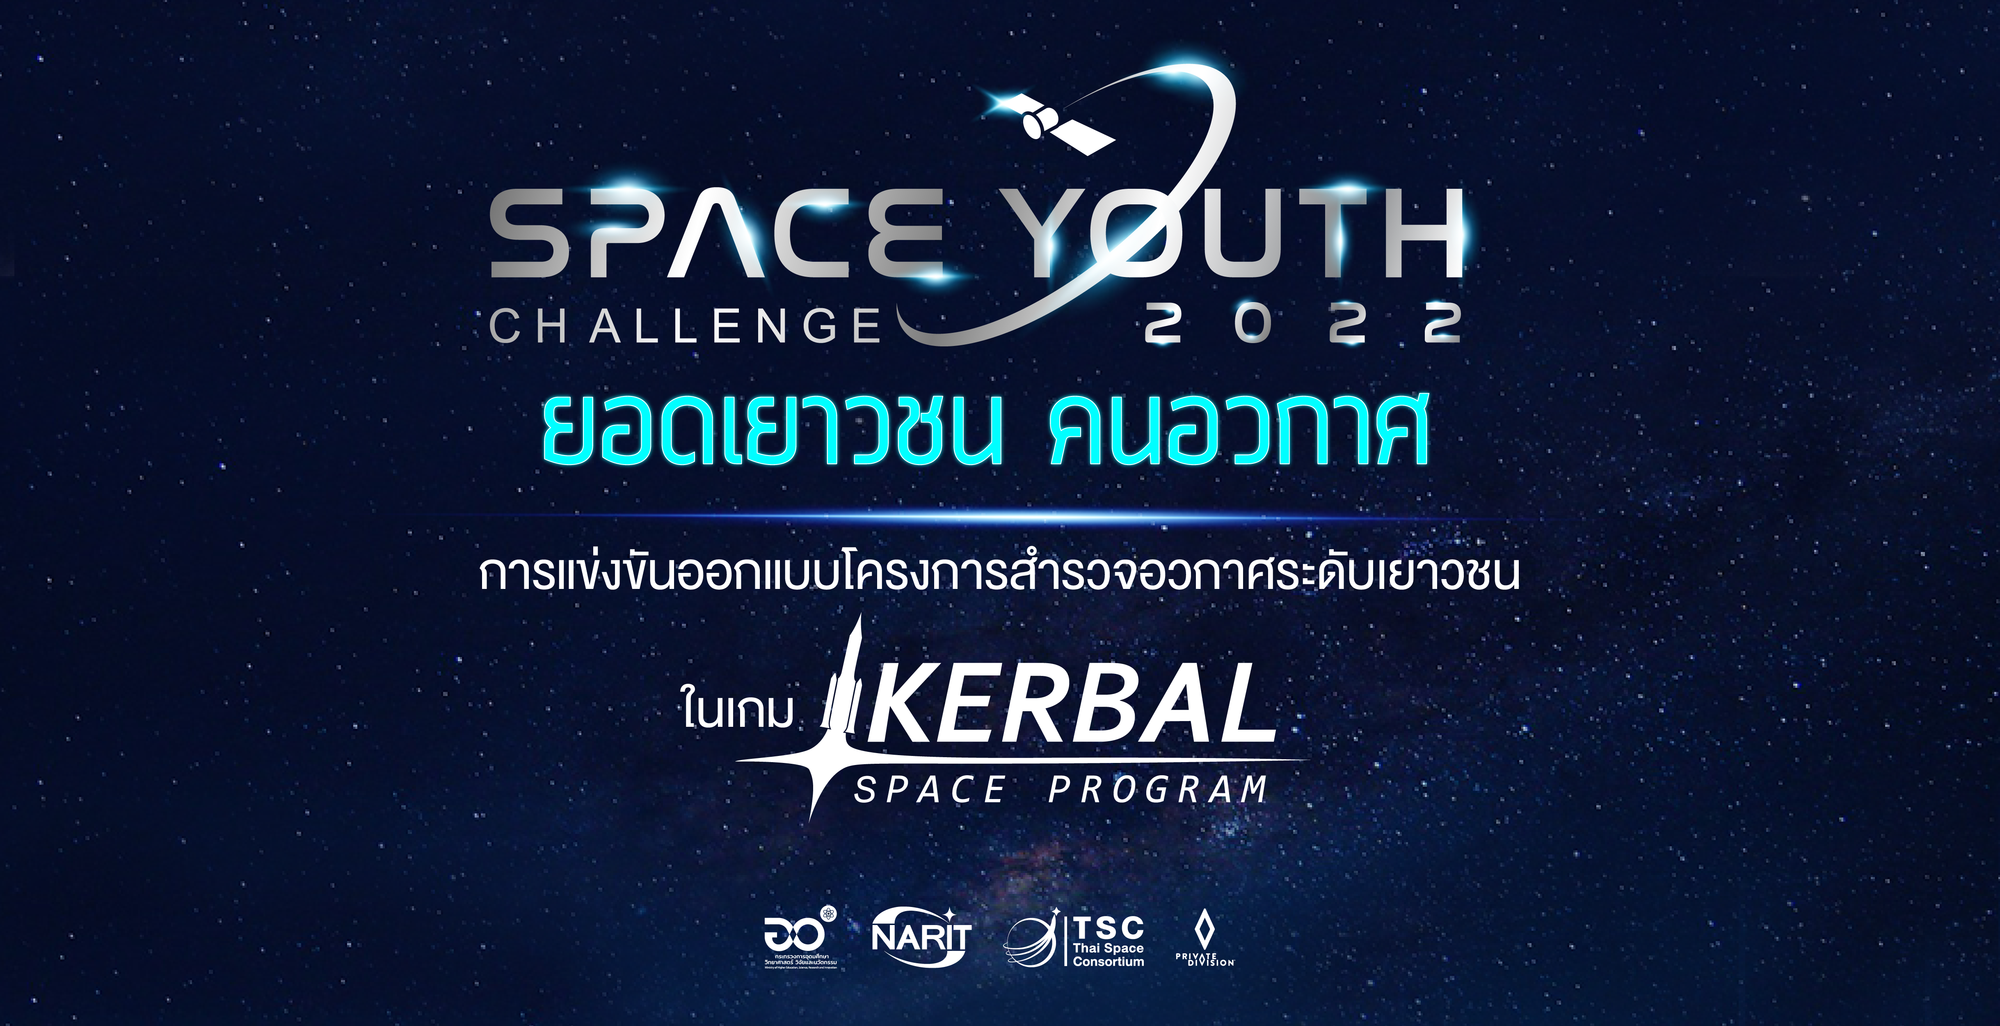 spaceyouth Banner 02